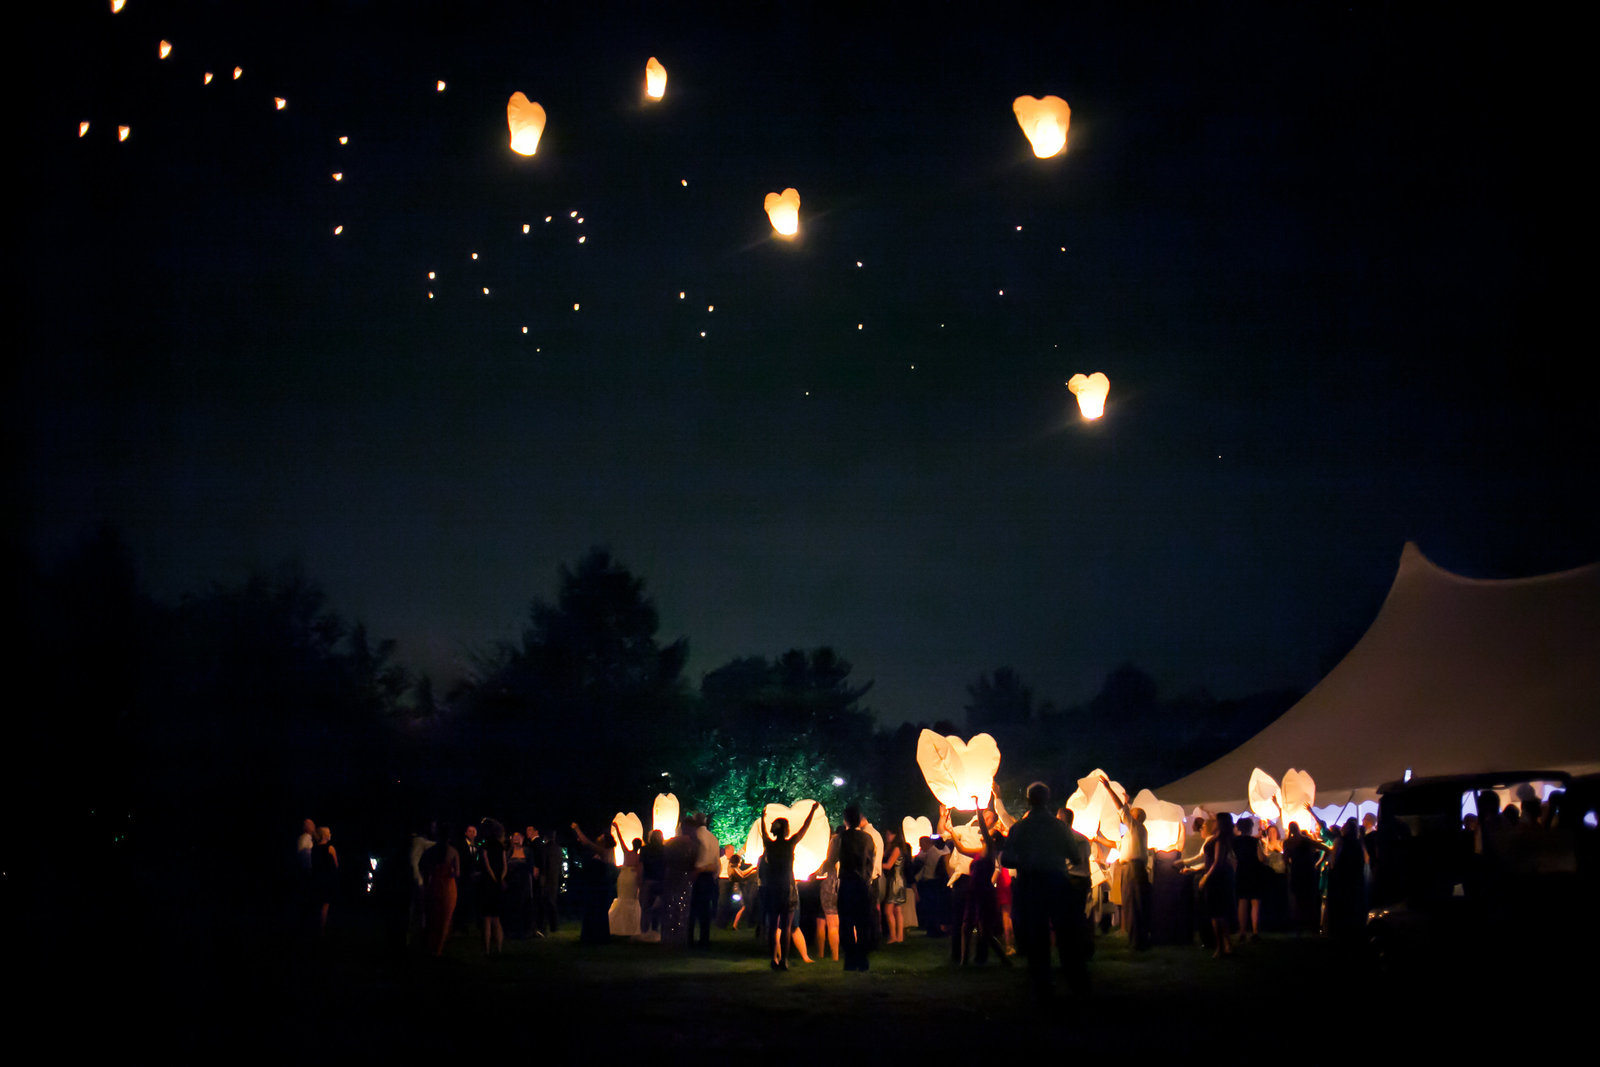 Incredible shot of a lantern release during the reception at this Philadelphia wedding.